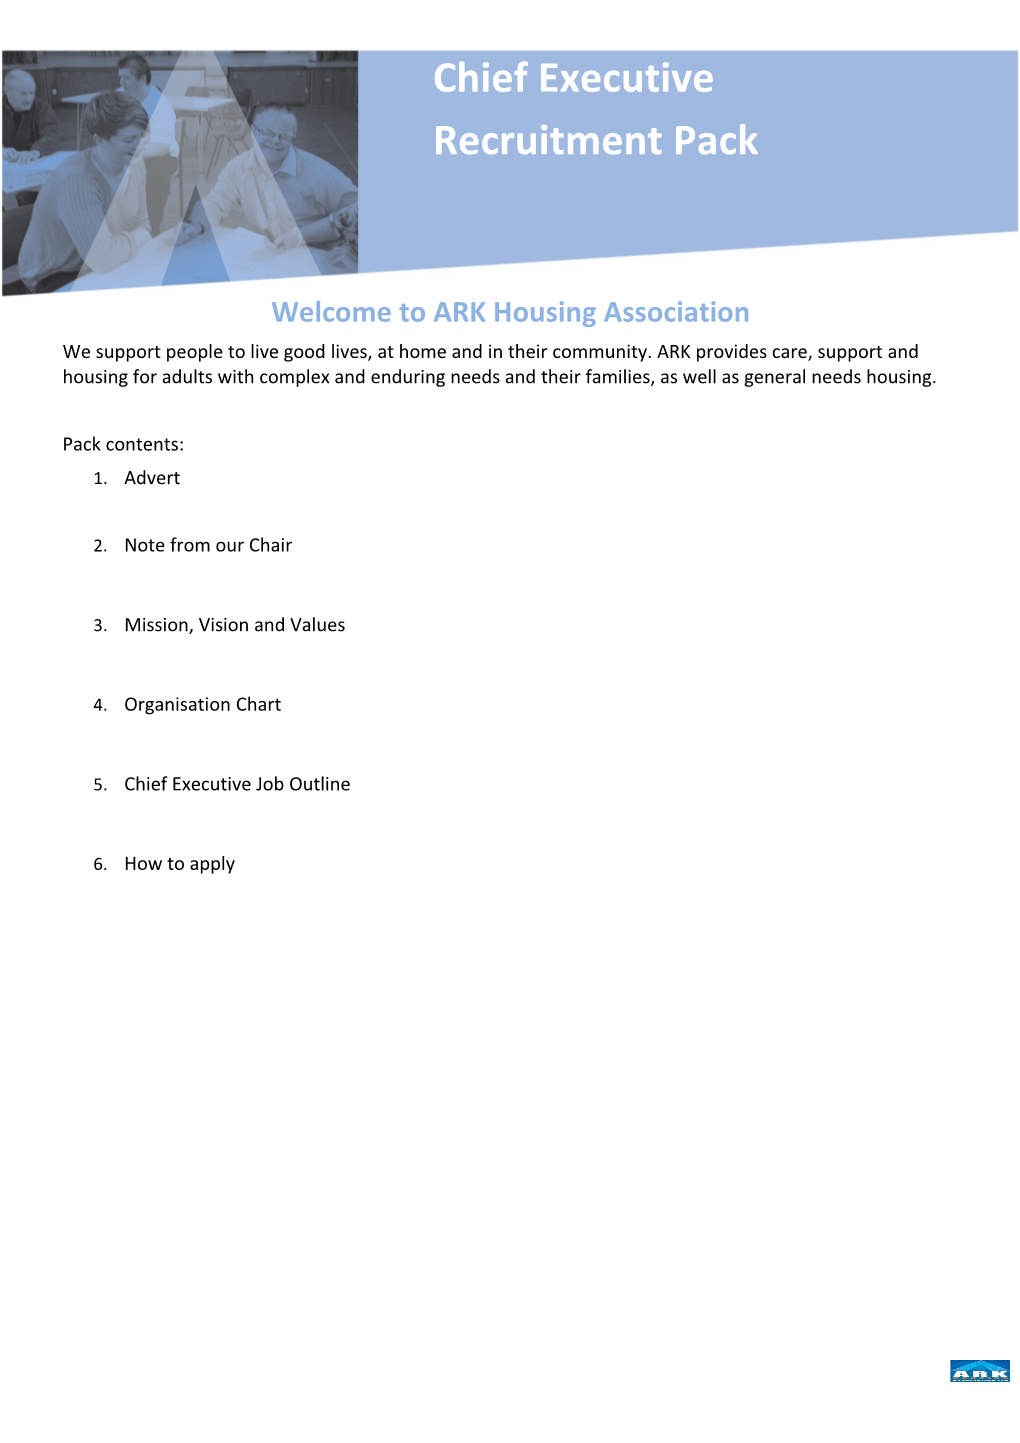 Welcome to ARK Housing Association